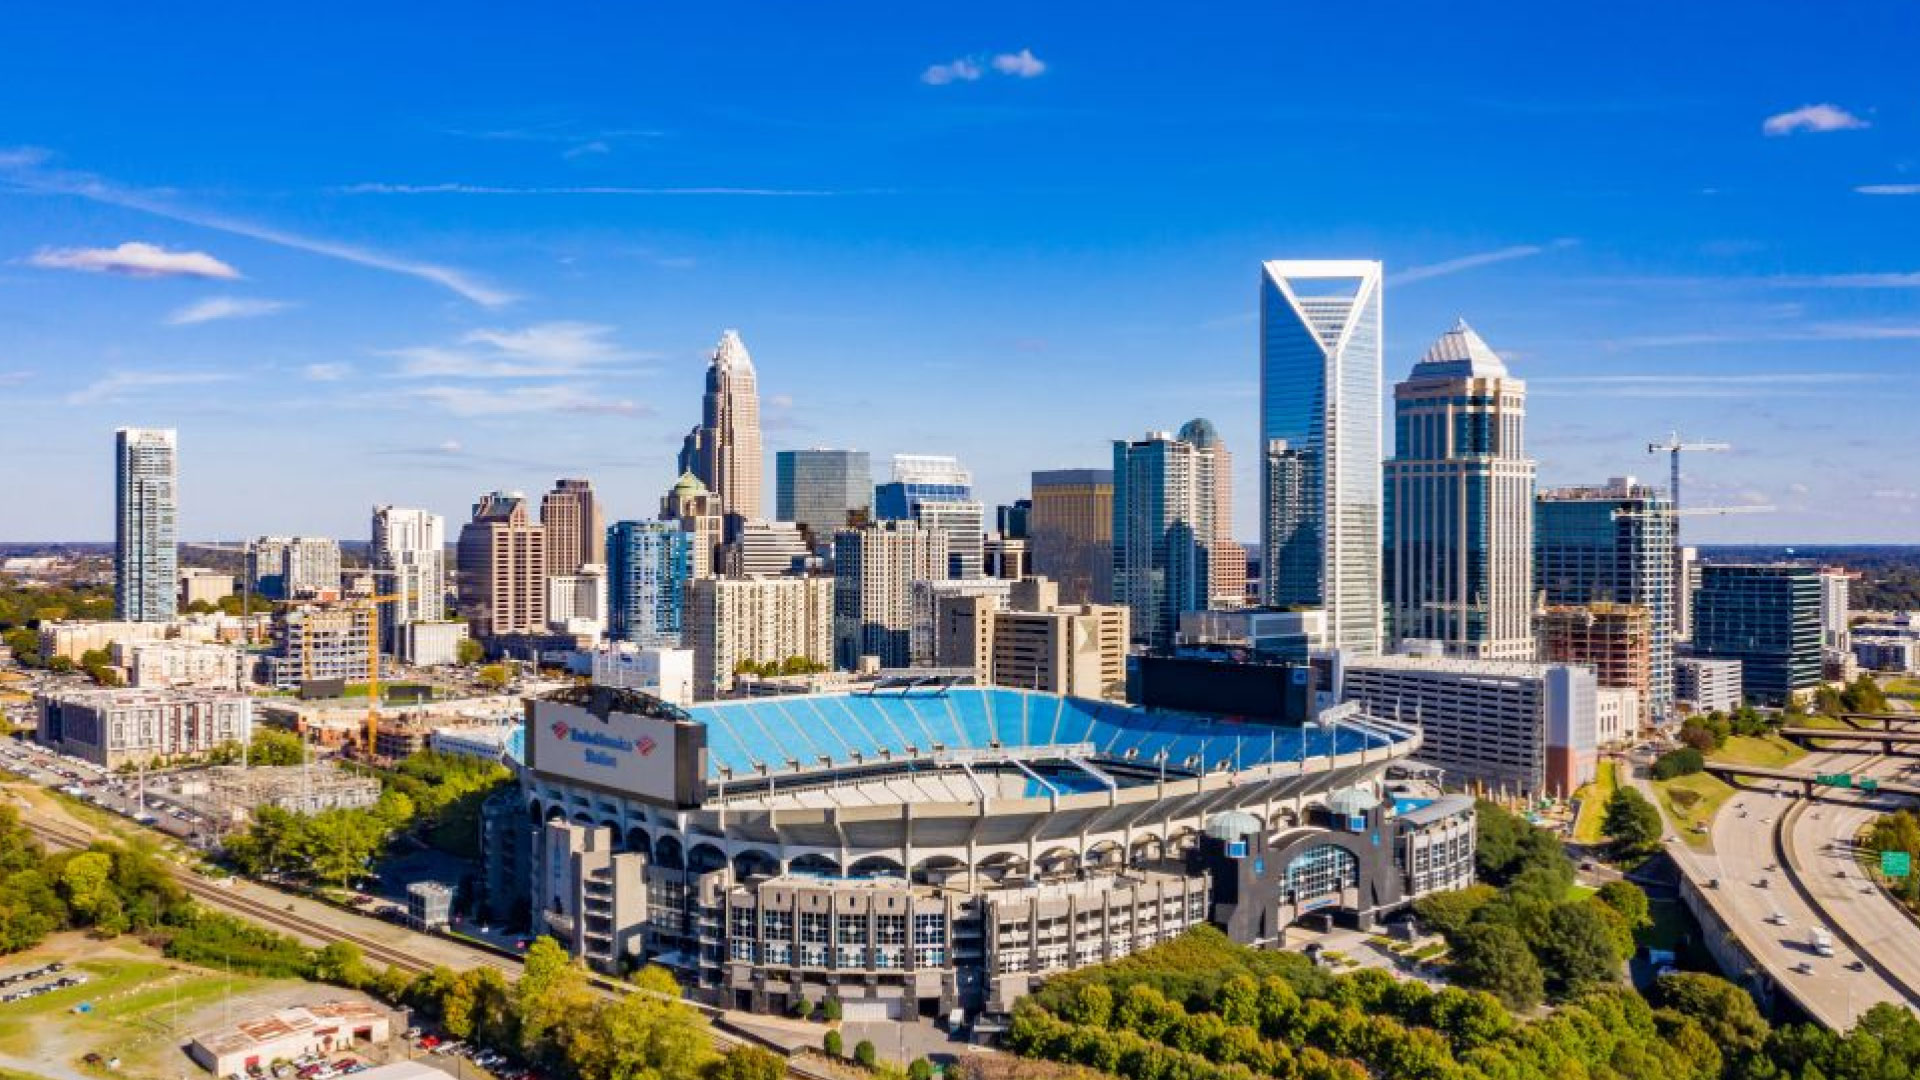 Commercial locksmith Service in Charlotte, NC